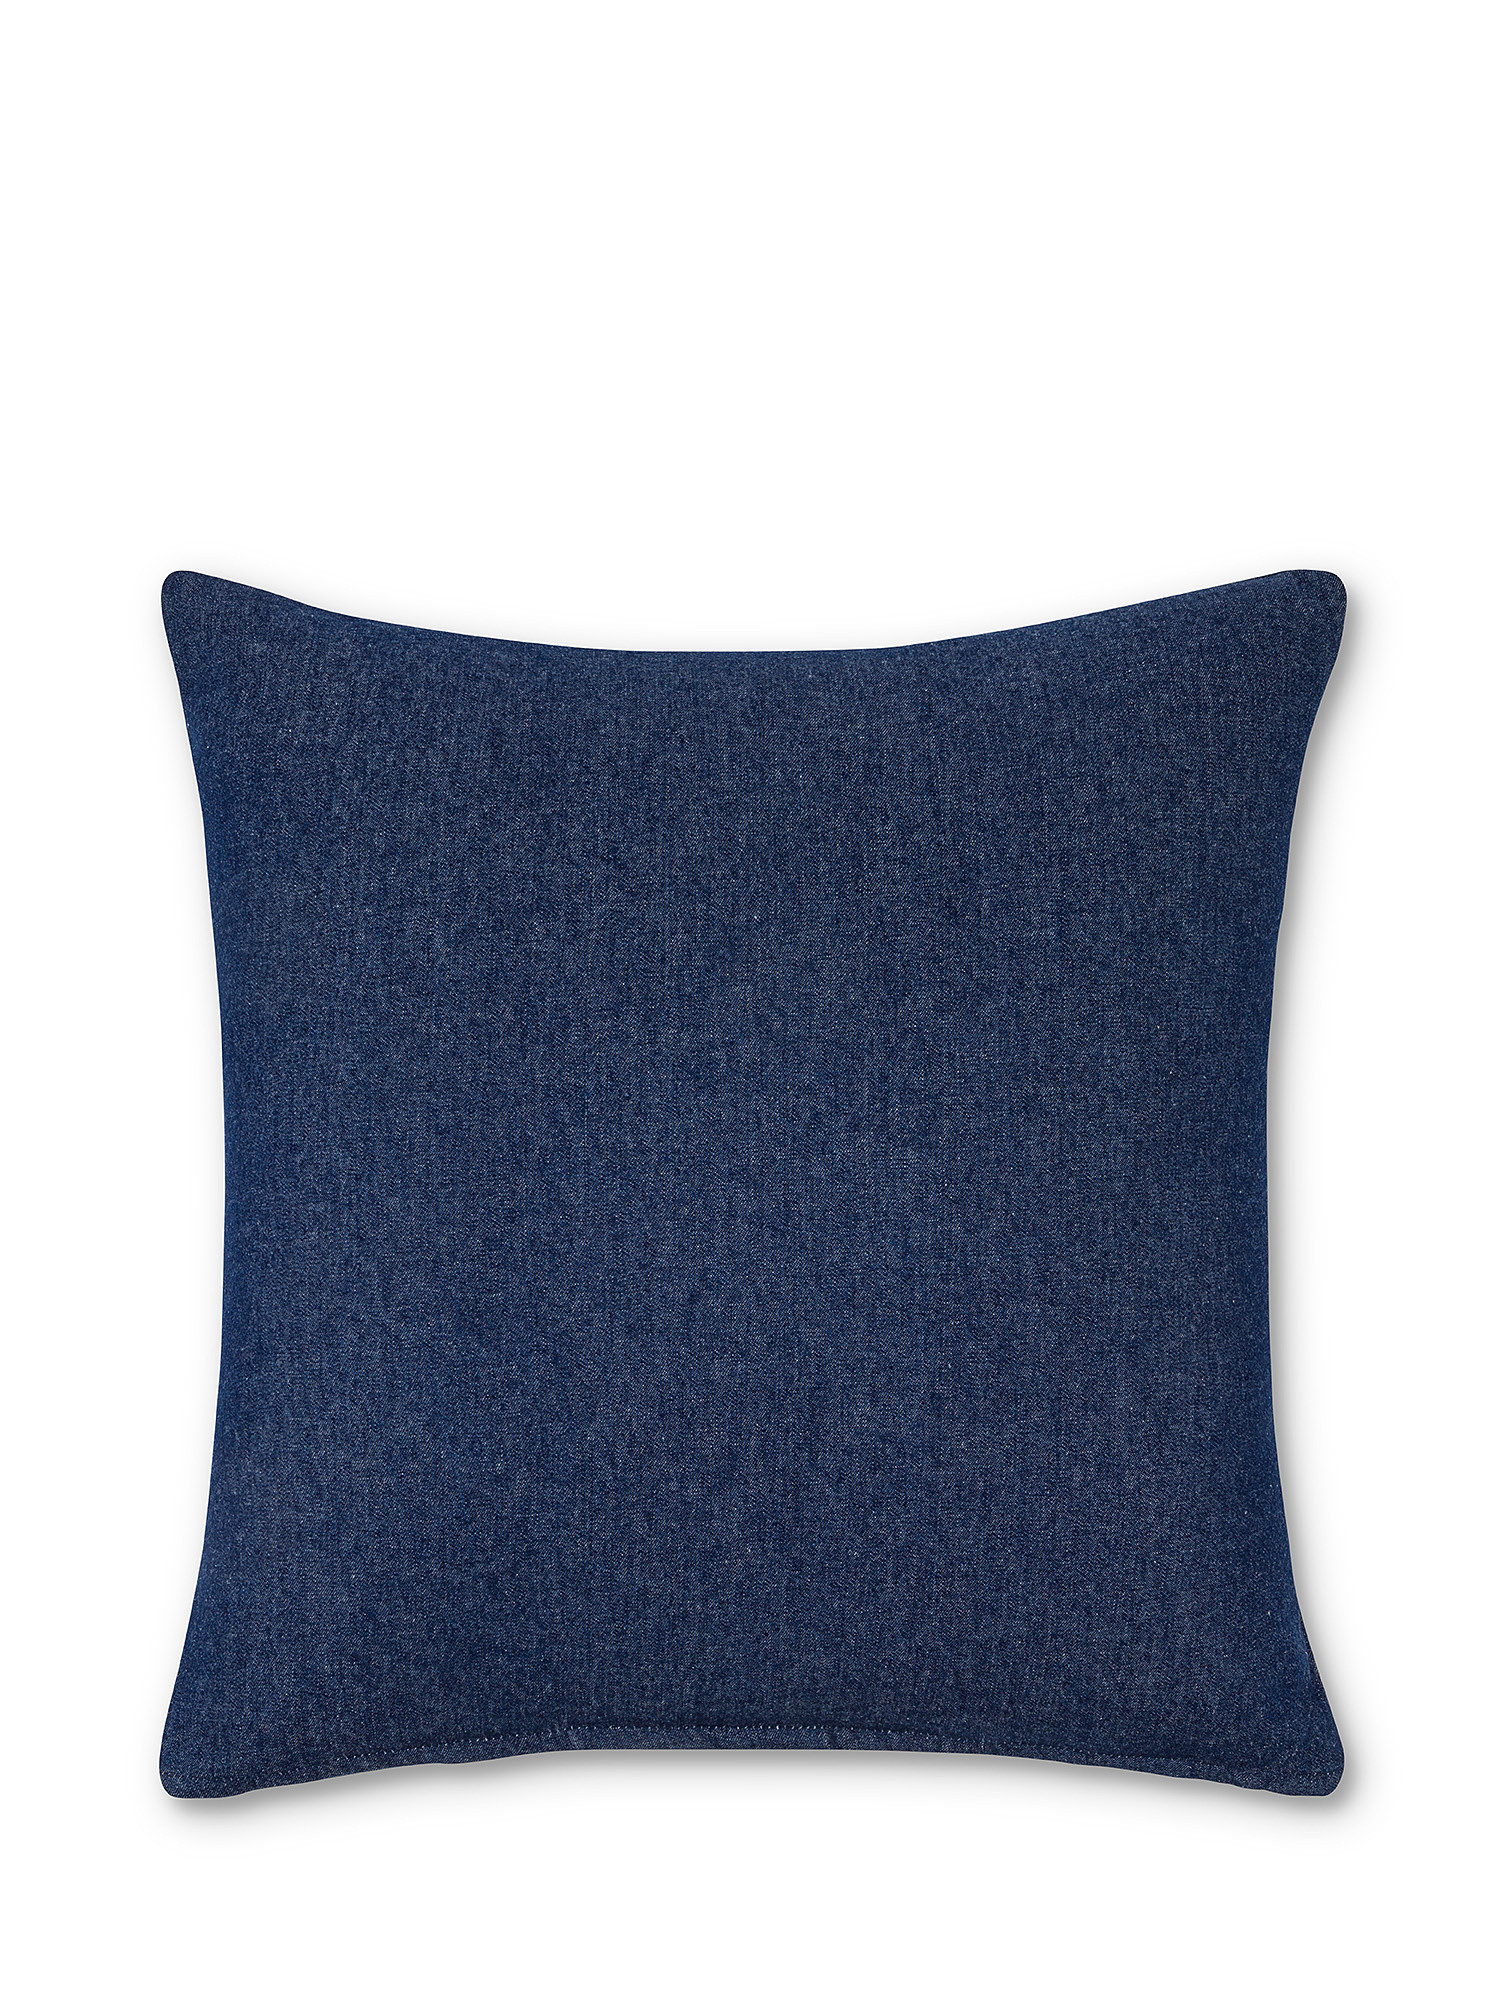 Cotton denim cushion with polka dot embroidery 45x45cm, Blue, large image number 1